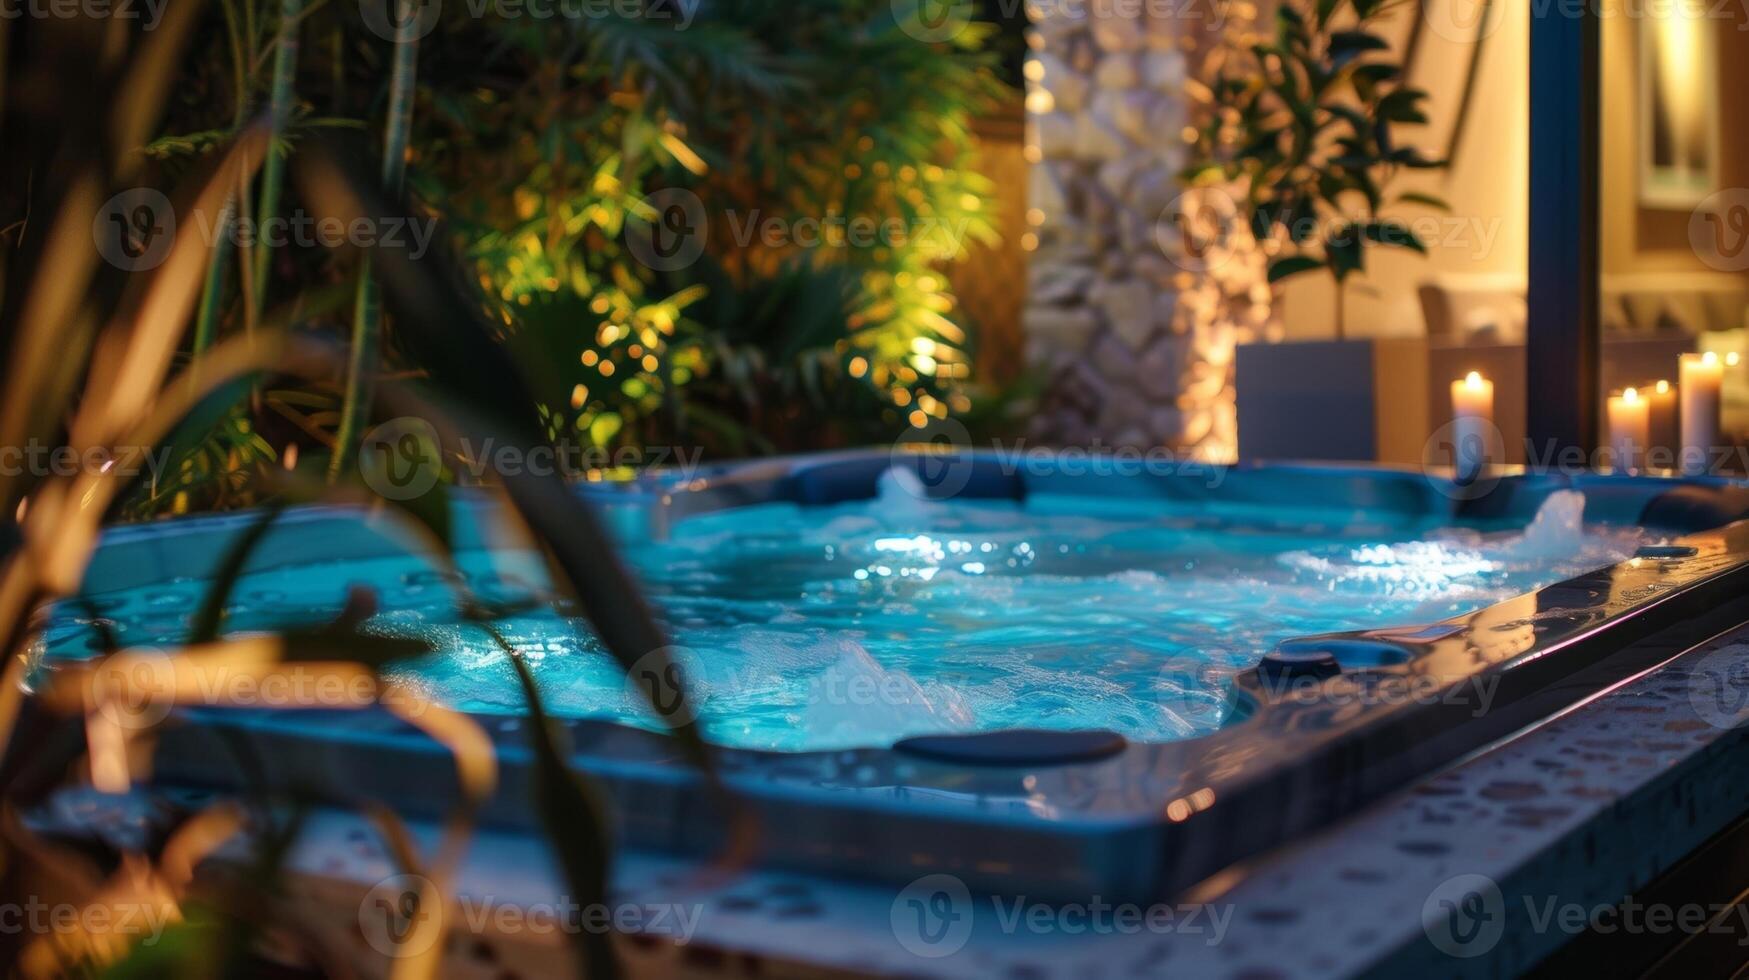 Soft music plays in the background enhancing the sensory experience of the spa under the stars. 2d flat cartoon photo